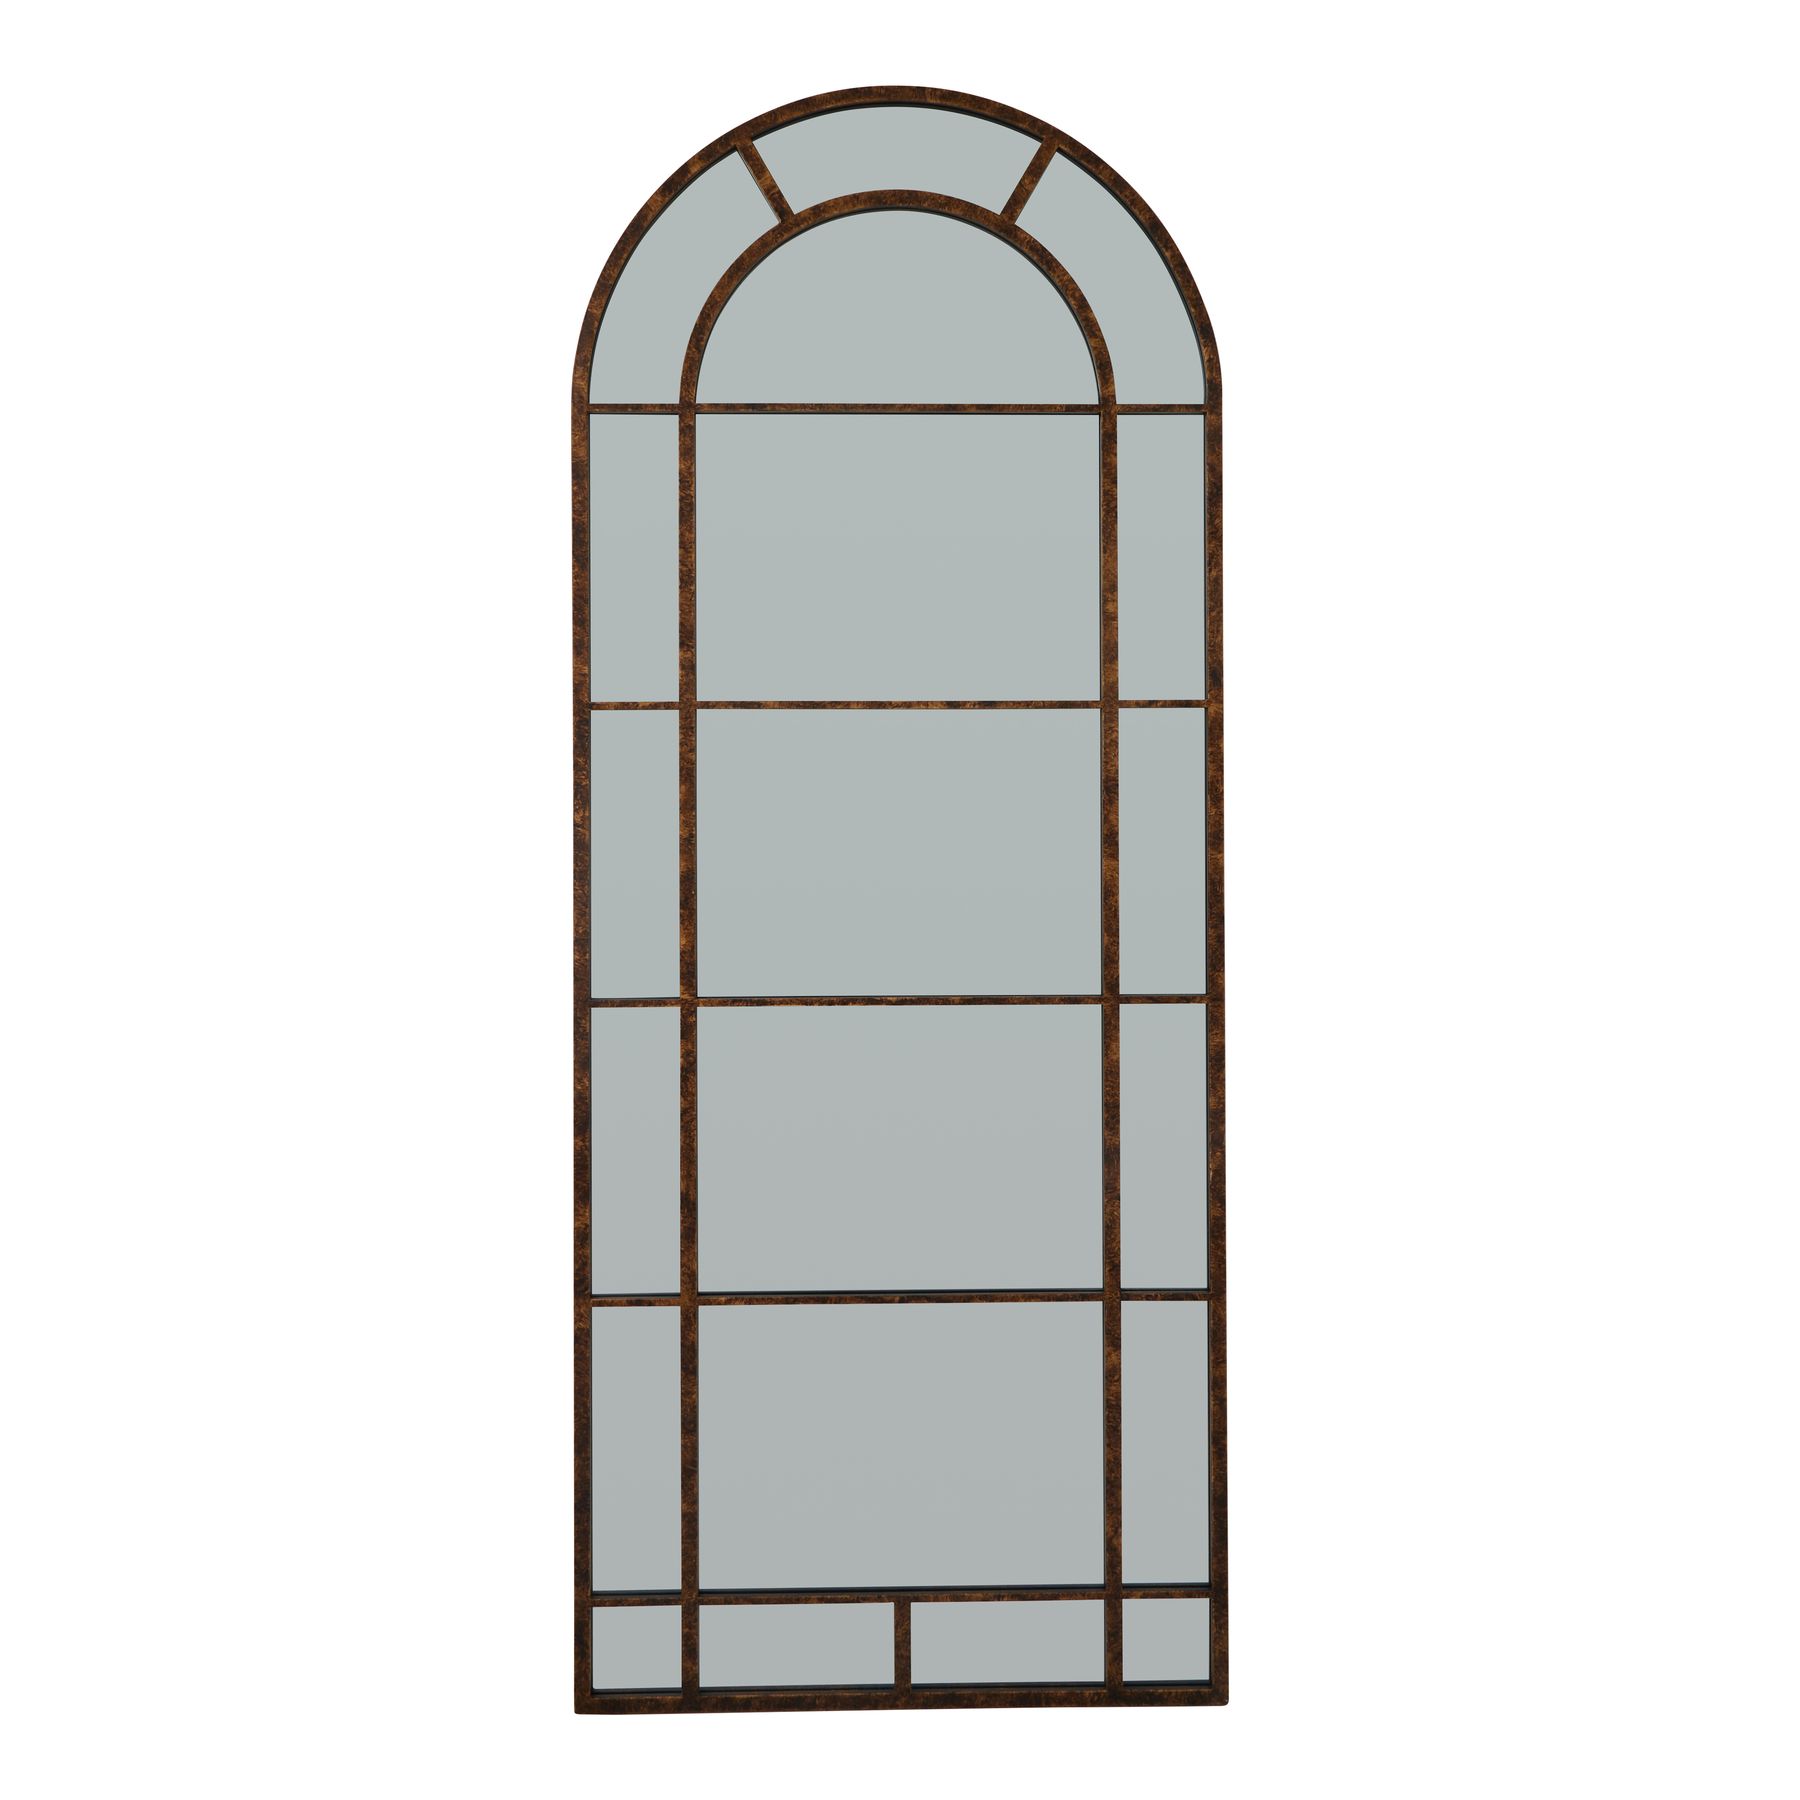 Rust Effect Large Arched Window Mirror - Image 1